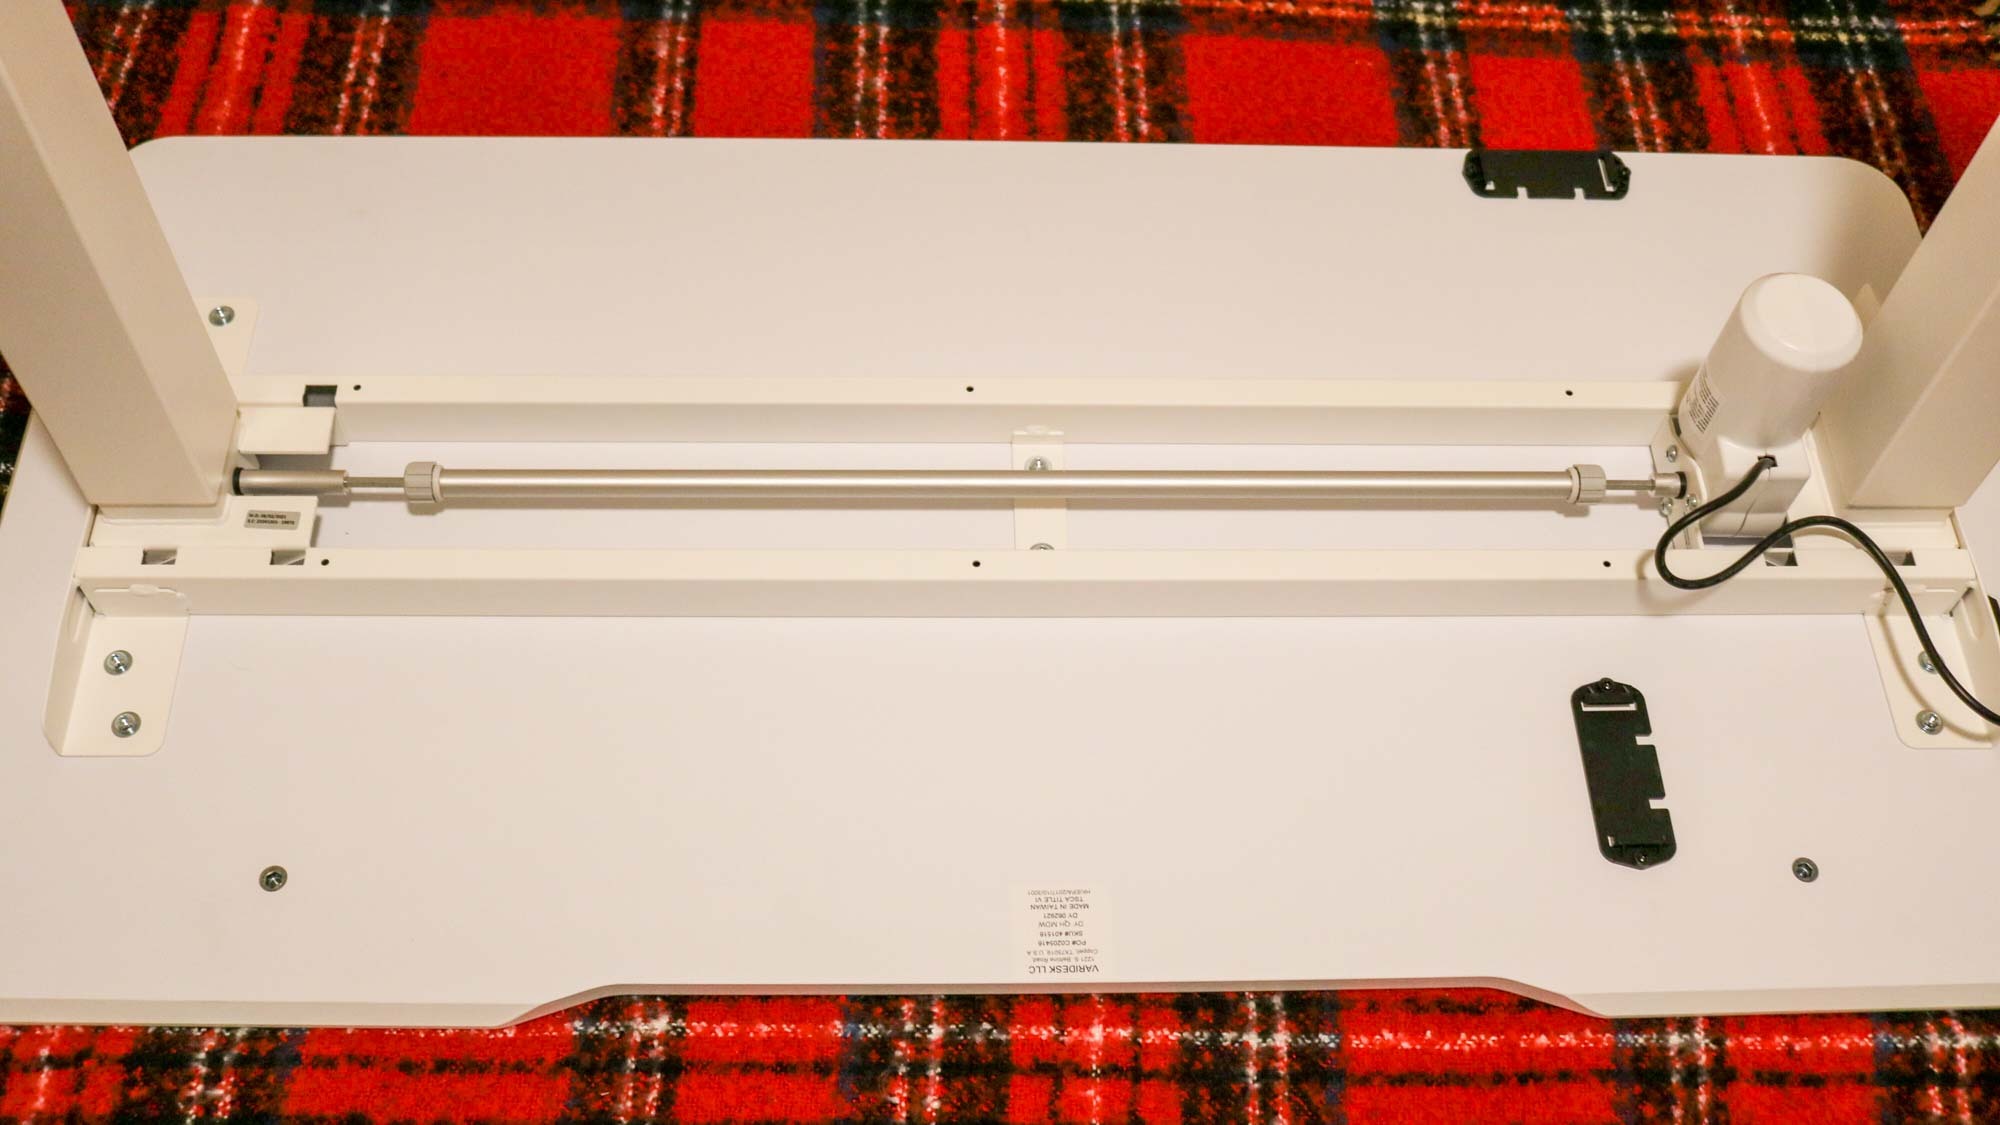 The underside of the Vari Essential Electric standing desk shows the single rod and motor system